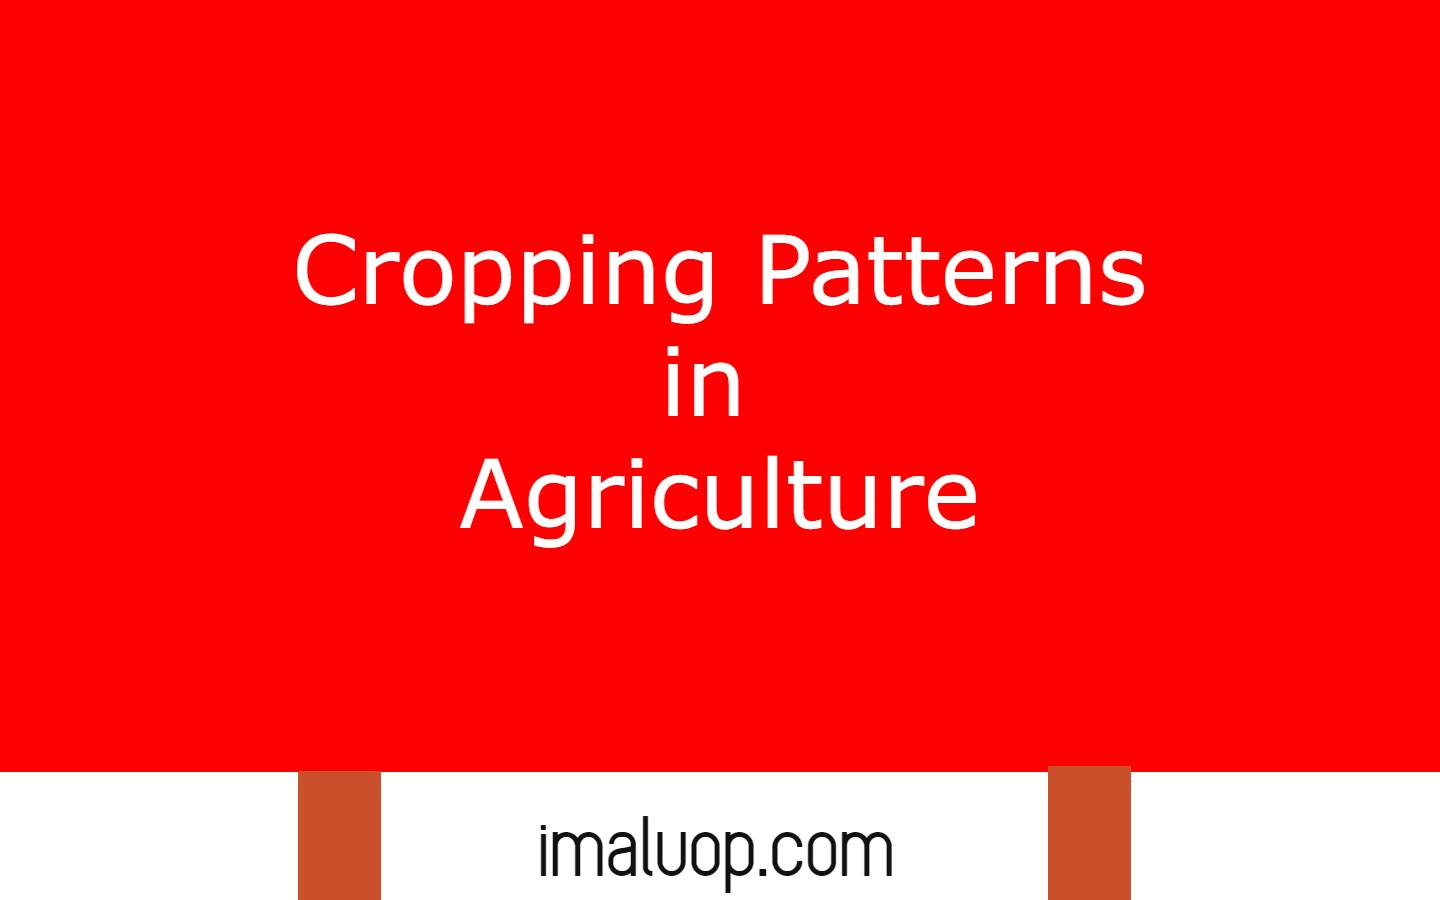 Cropping Patterns in Agriculture